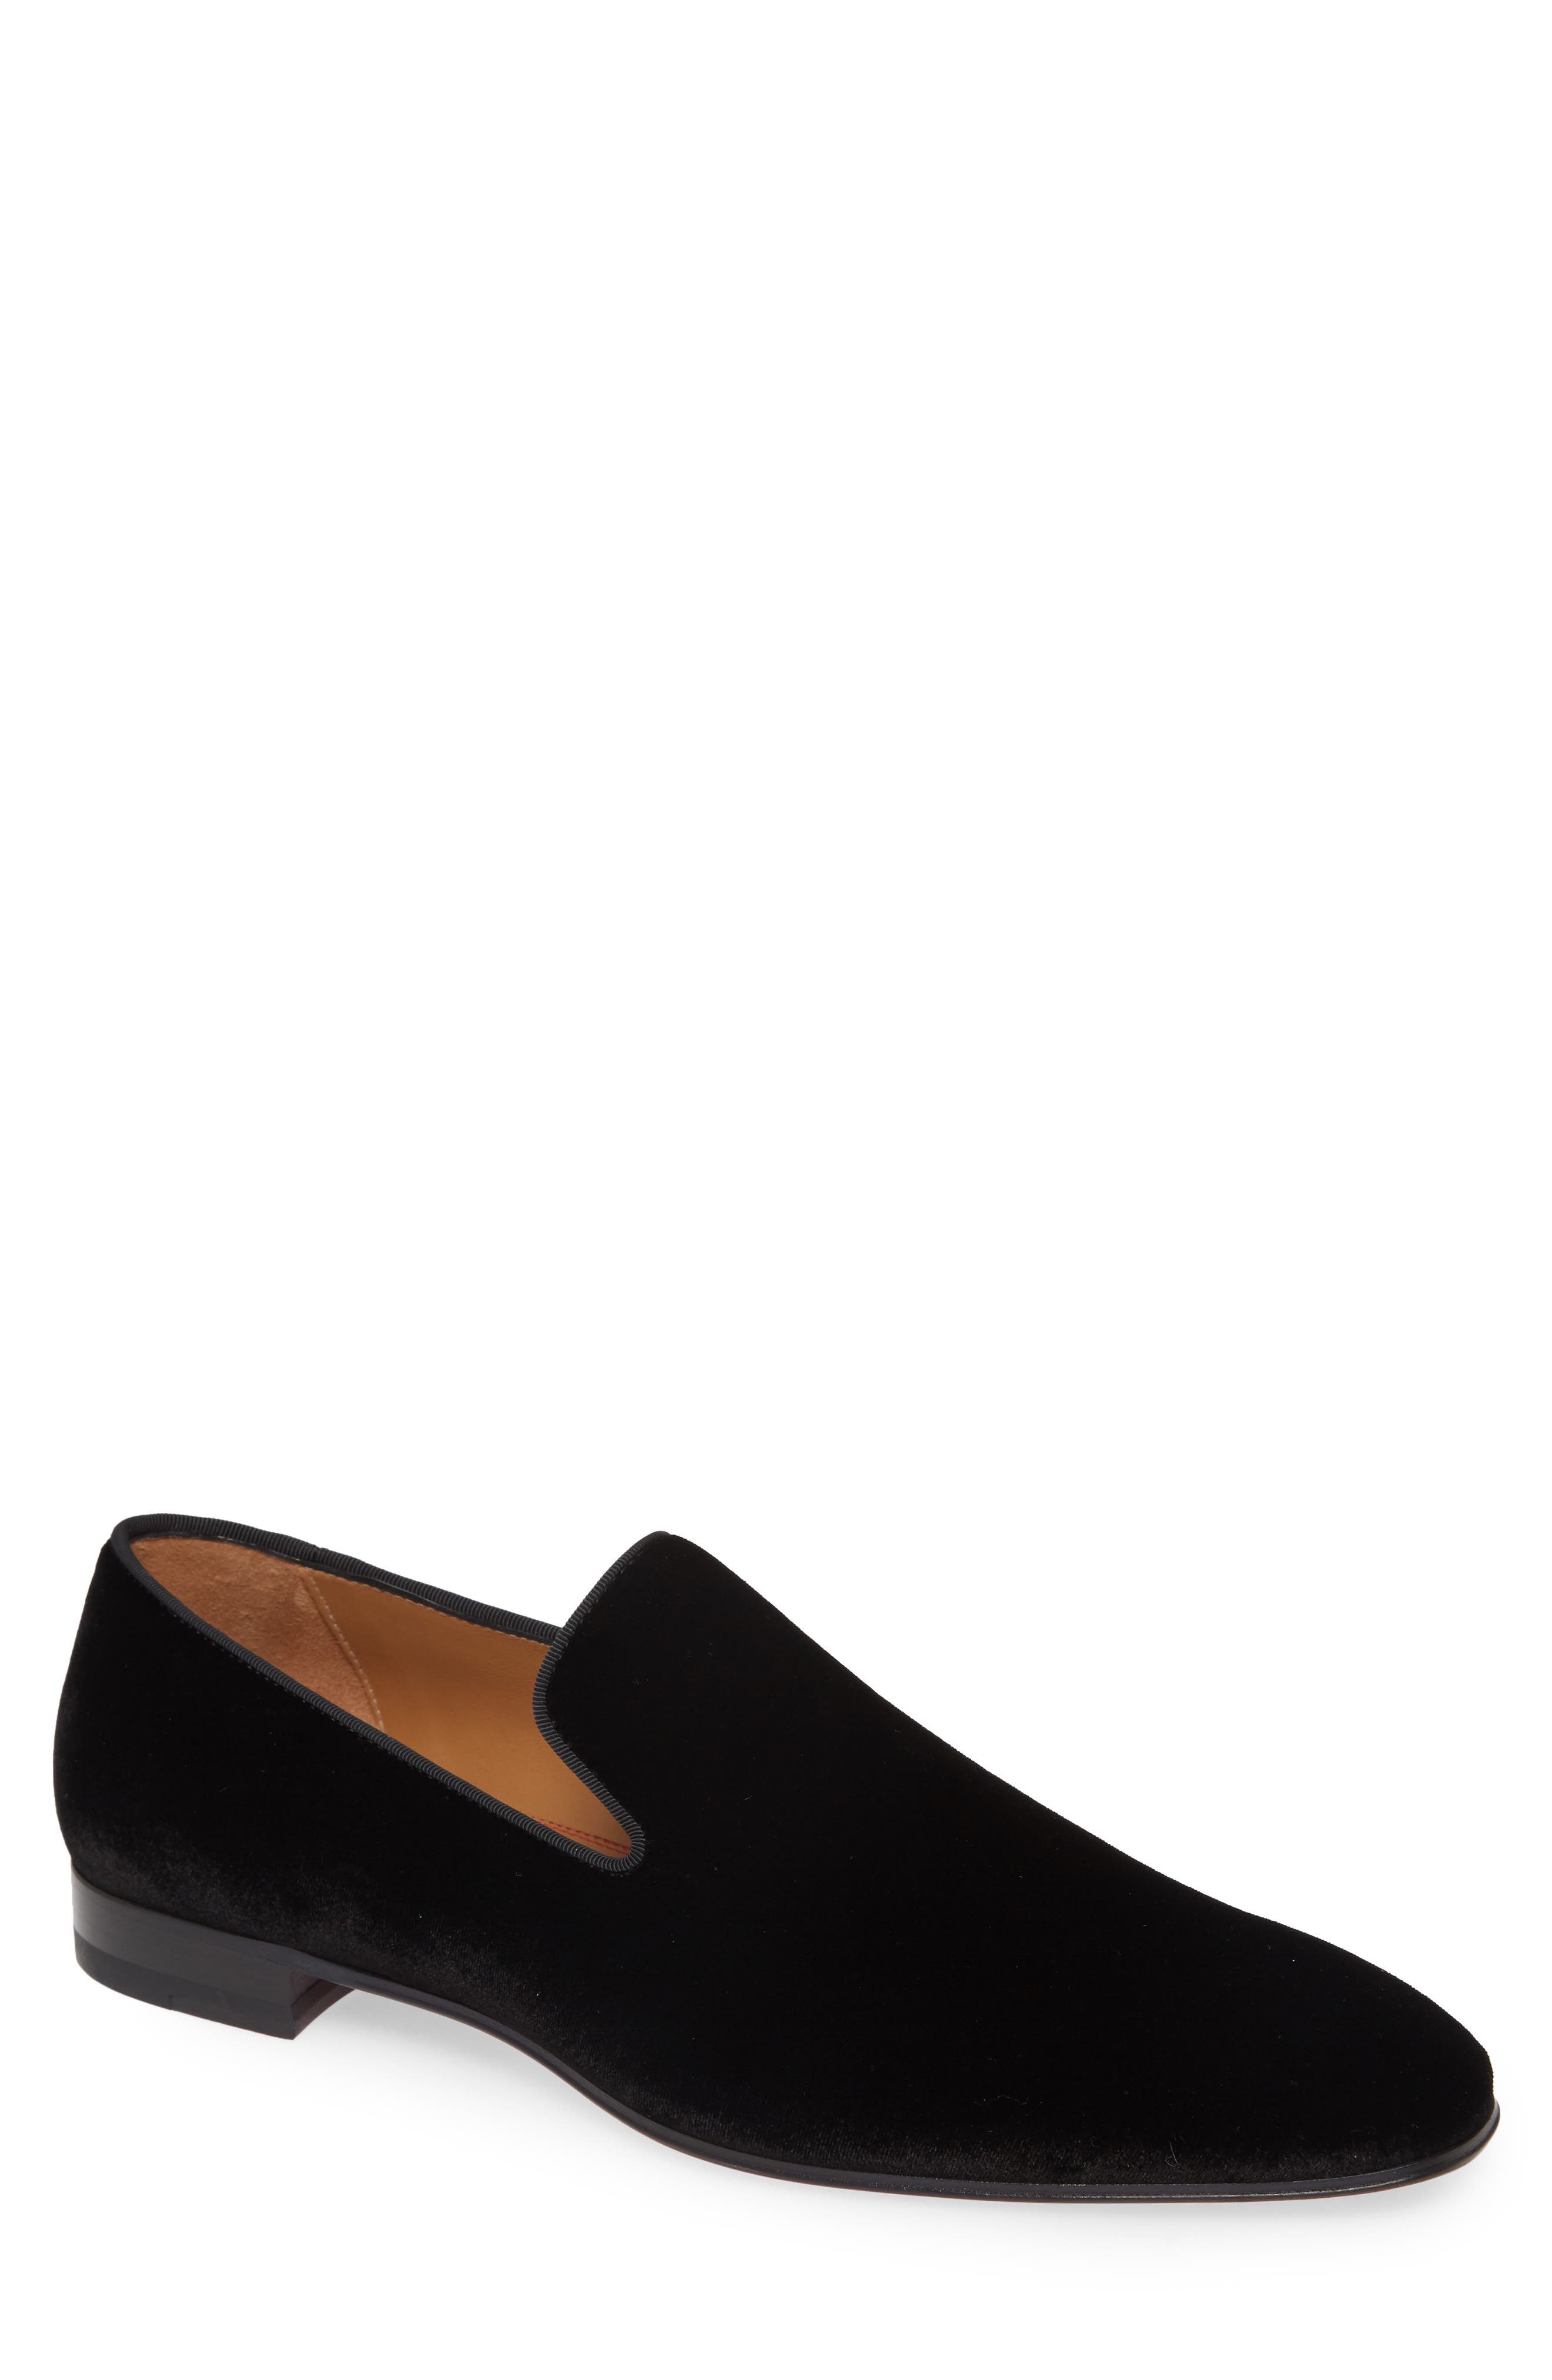 christian louboutin mens loafers